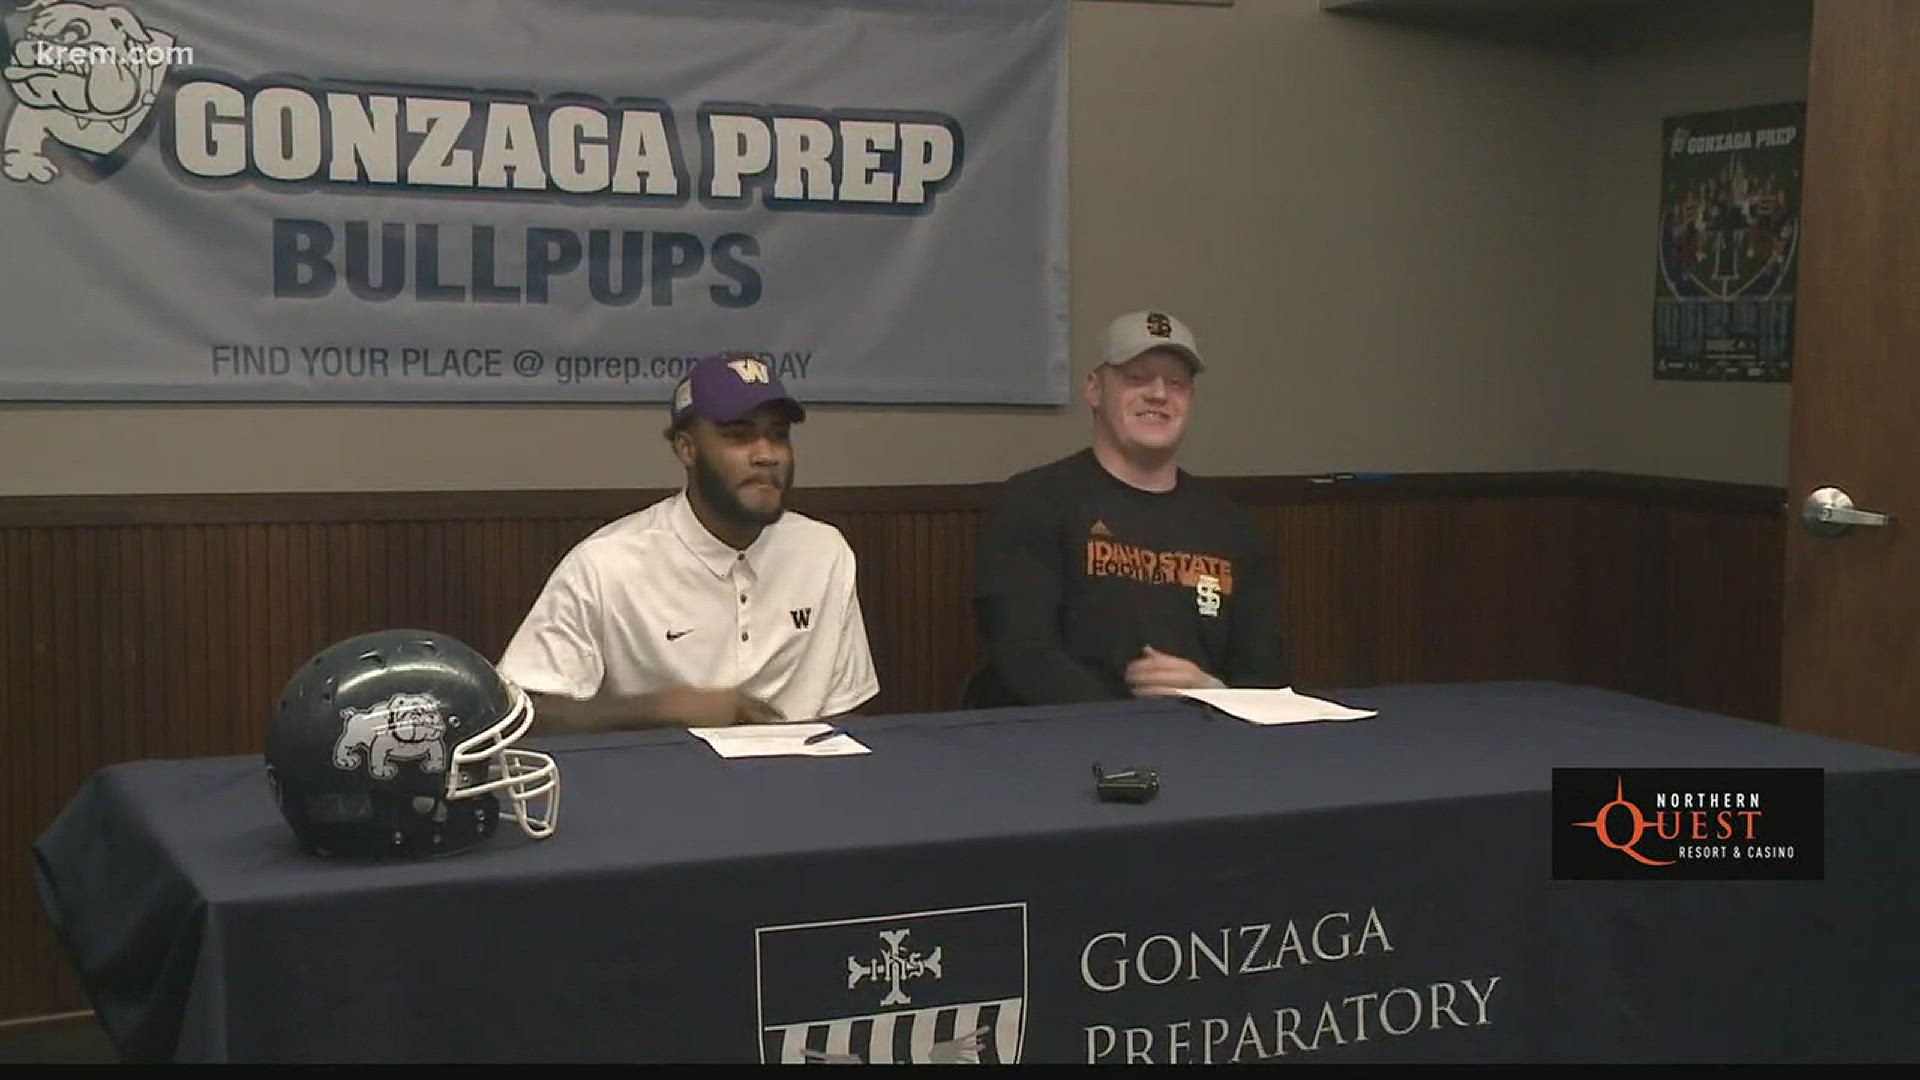 Two of the most dynamic playmakers in our area will head to Washington as Devin Culp (Gonzaga Prep) and Colson Yankoff (Coeur d'Alene) will play for Chris Petersen.